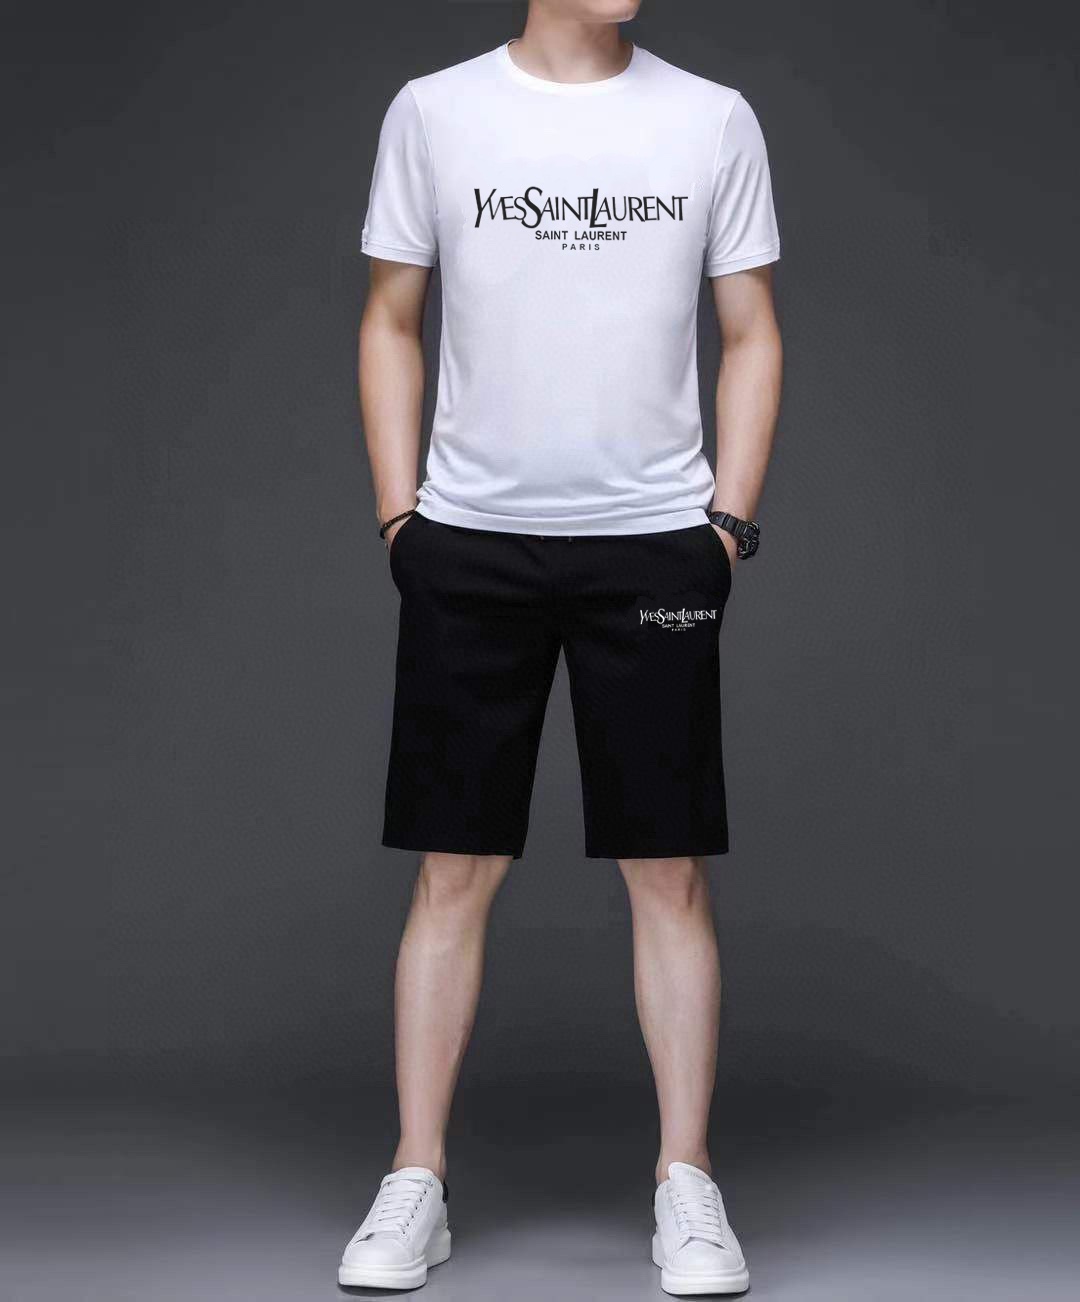 Yves Saint Laurent Clothing Shorts T-Shirt Two Piece Outfits & Matching Sets Men Short Sleeve